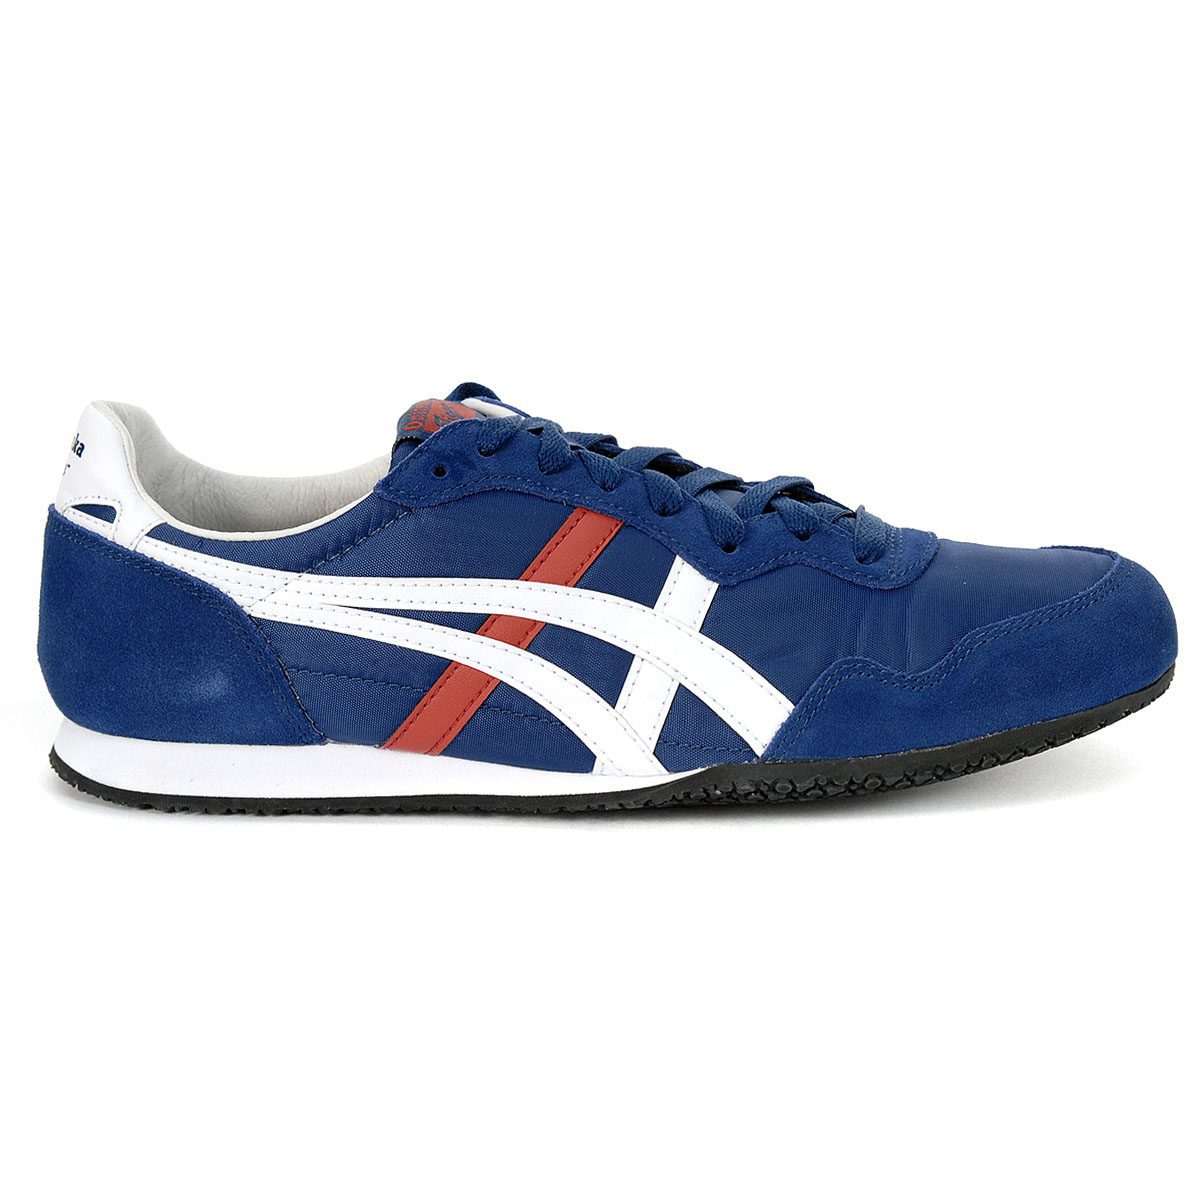 asics and onitsuka tiger shoes,Save up to 19%,www.ilcascinone.com